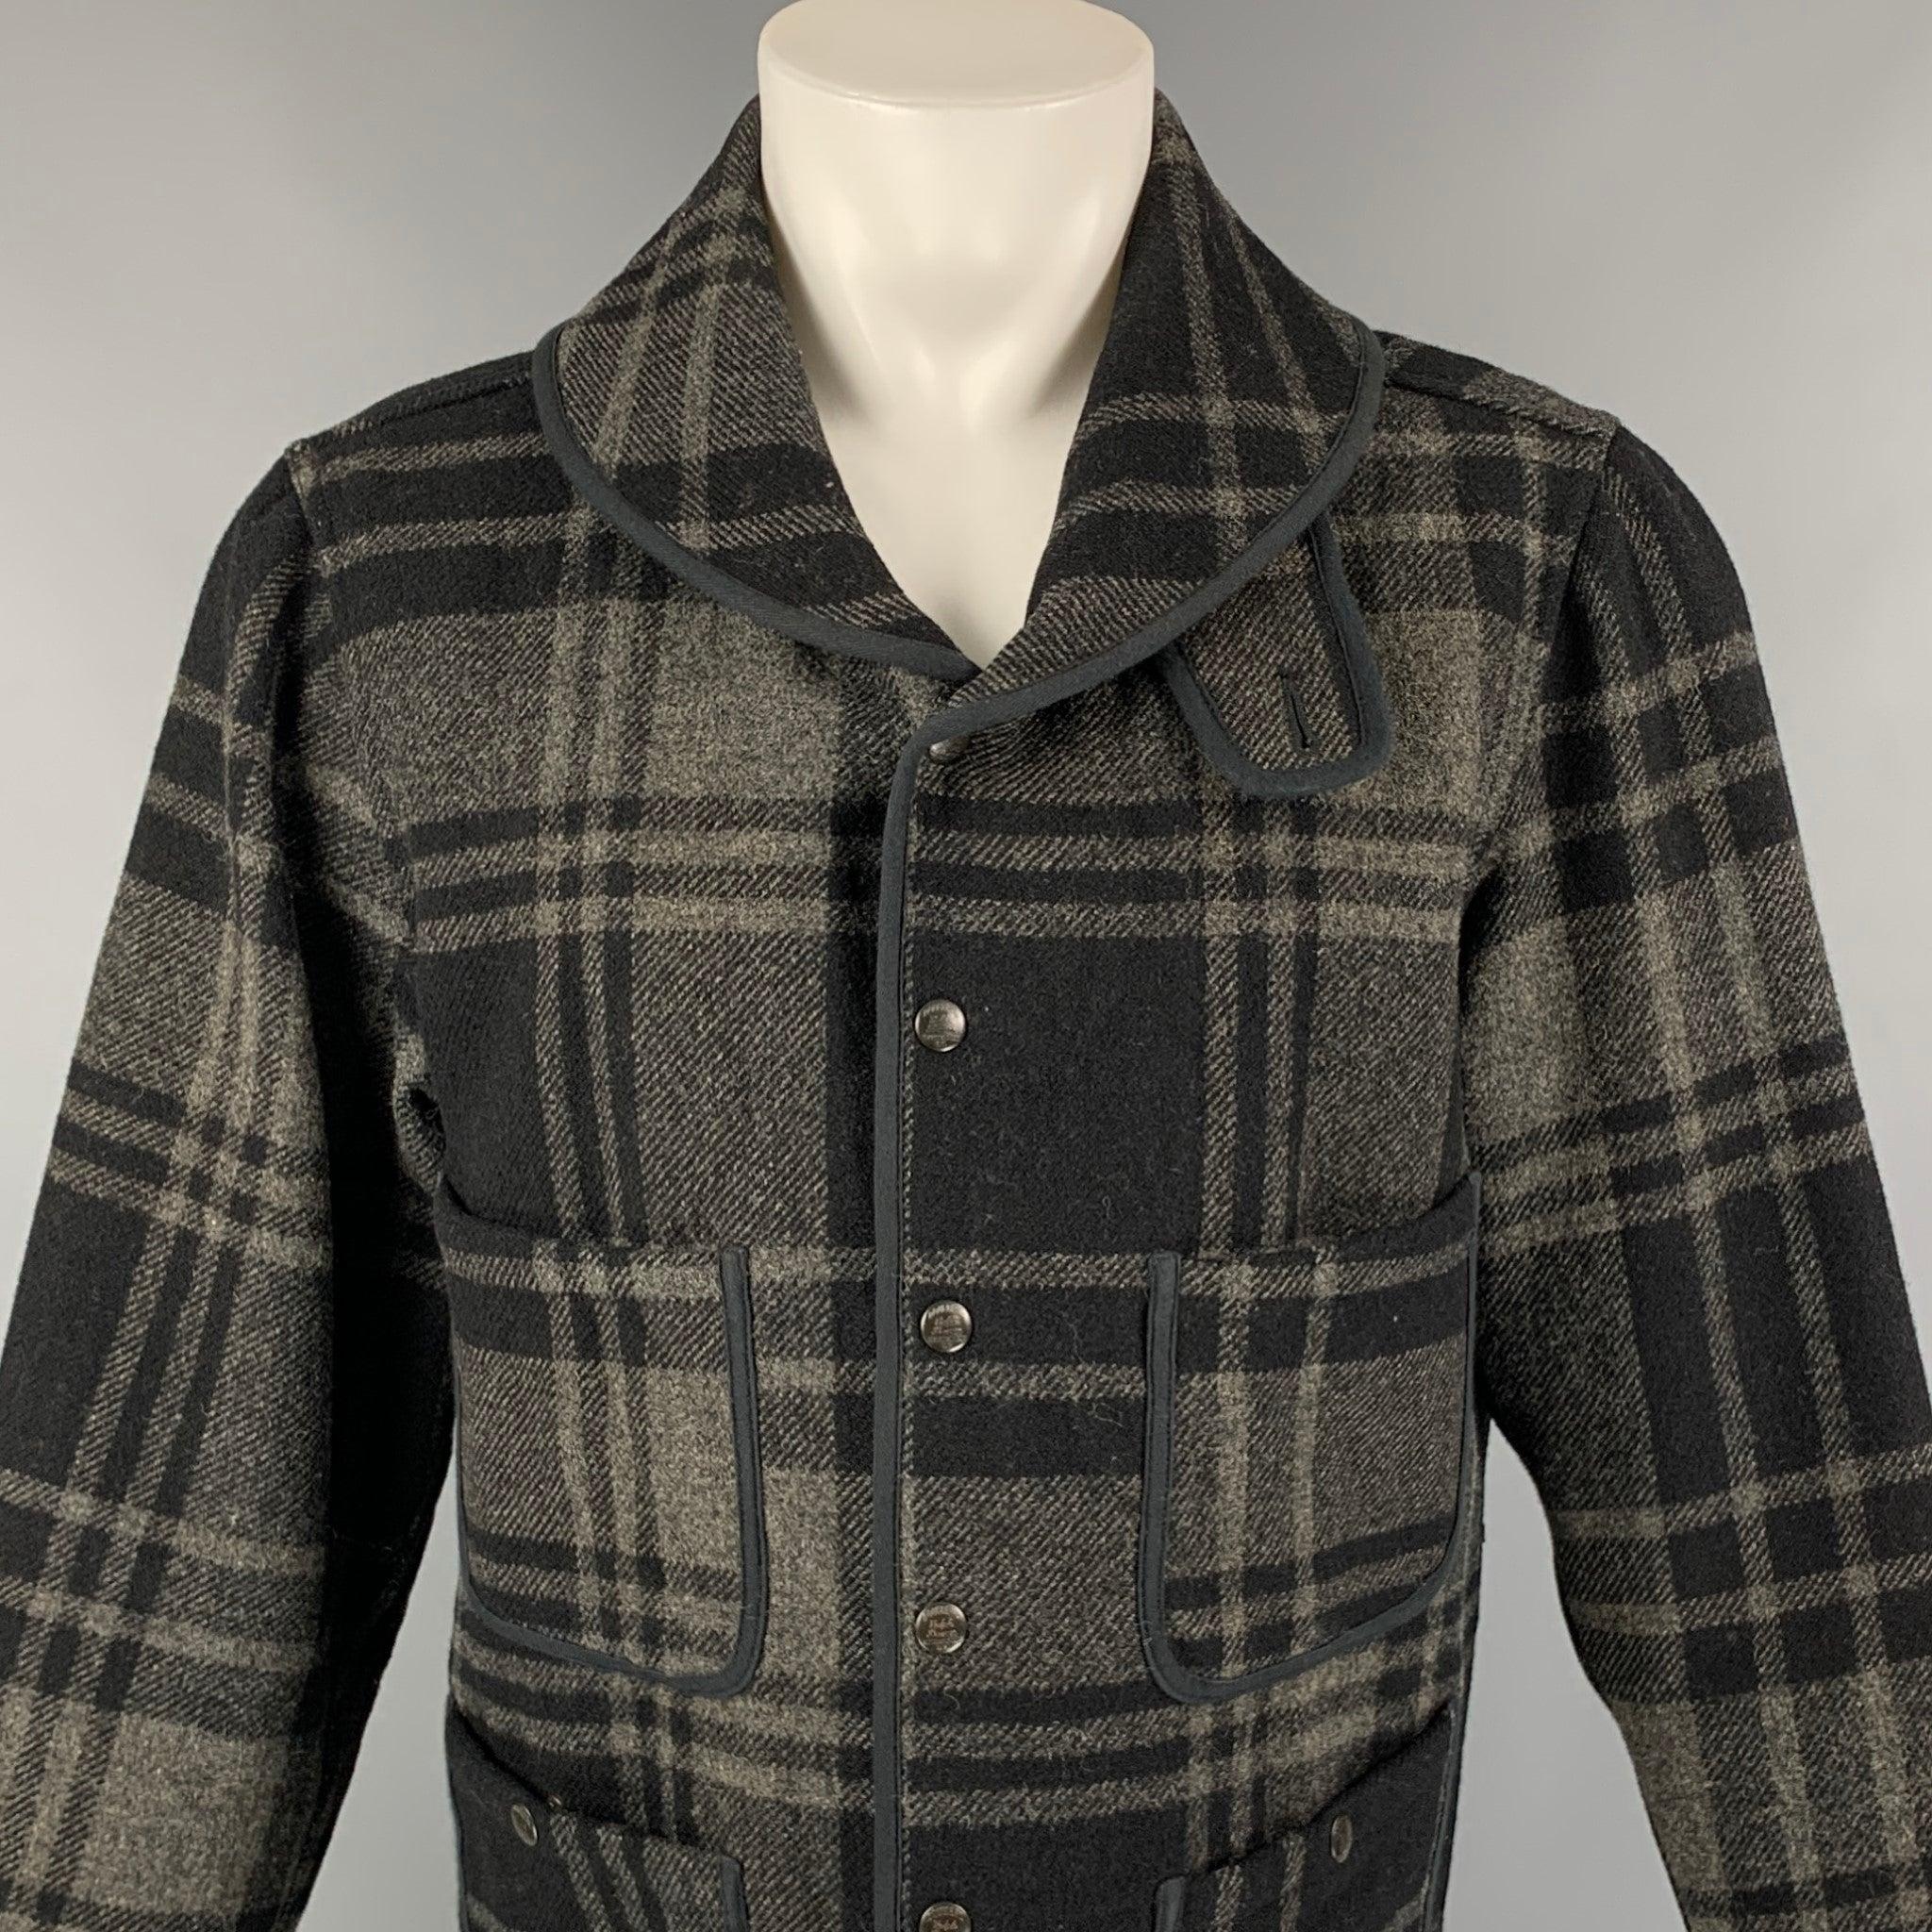 RRL by RALPH LAUREN jacket comes in a black & grey wool featuring a shawl collar, back belt, patch pockets, and a snap button closure.
Very Good
Pre-Owned Condition. 

Marked:   M 

Measurements: 
 
Shoulder: 18 inches  Chest: 40 inches  Sleeve: 26